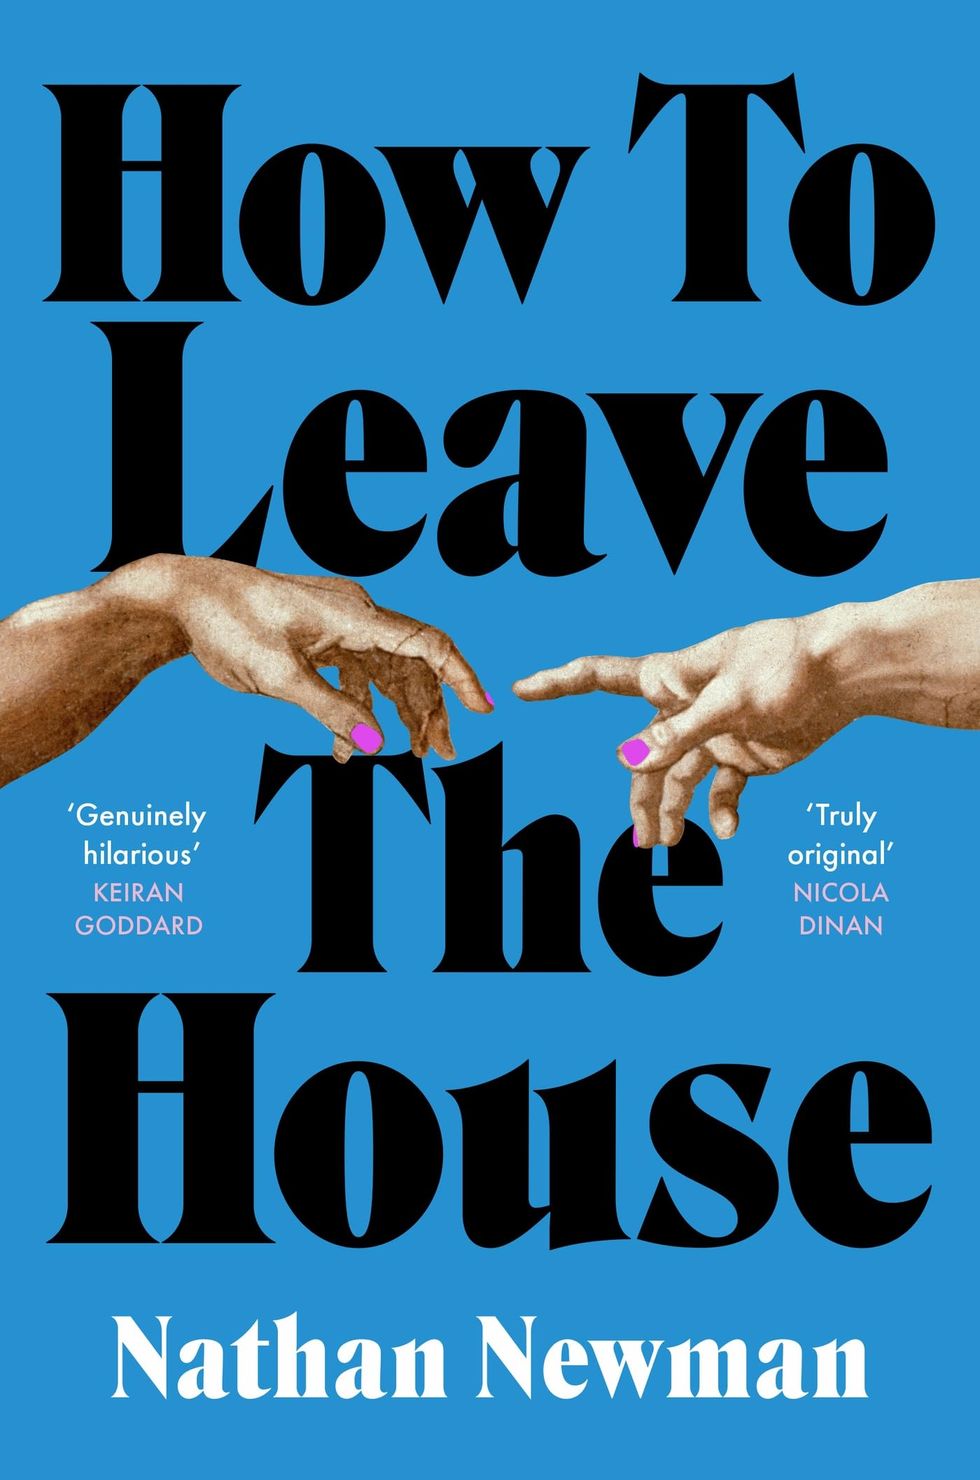 How to Leave the House, Nathan Newman (2 May)